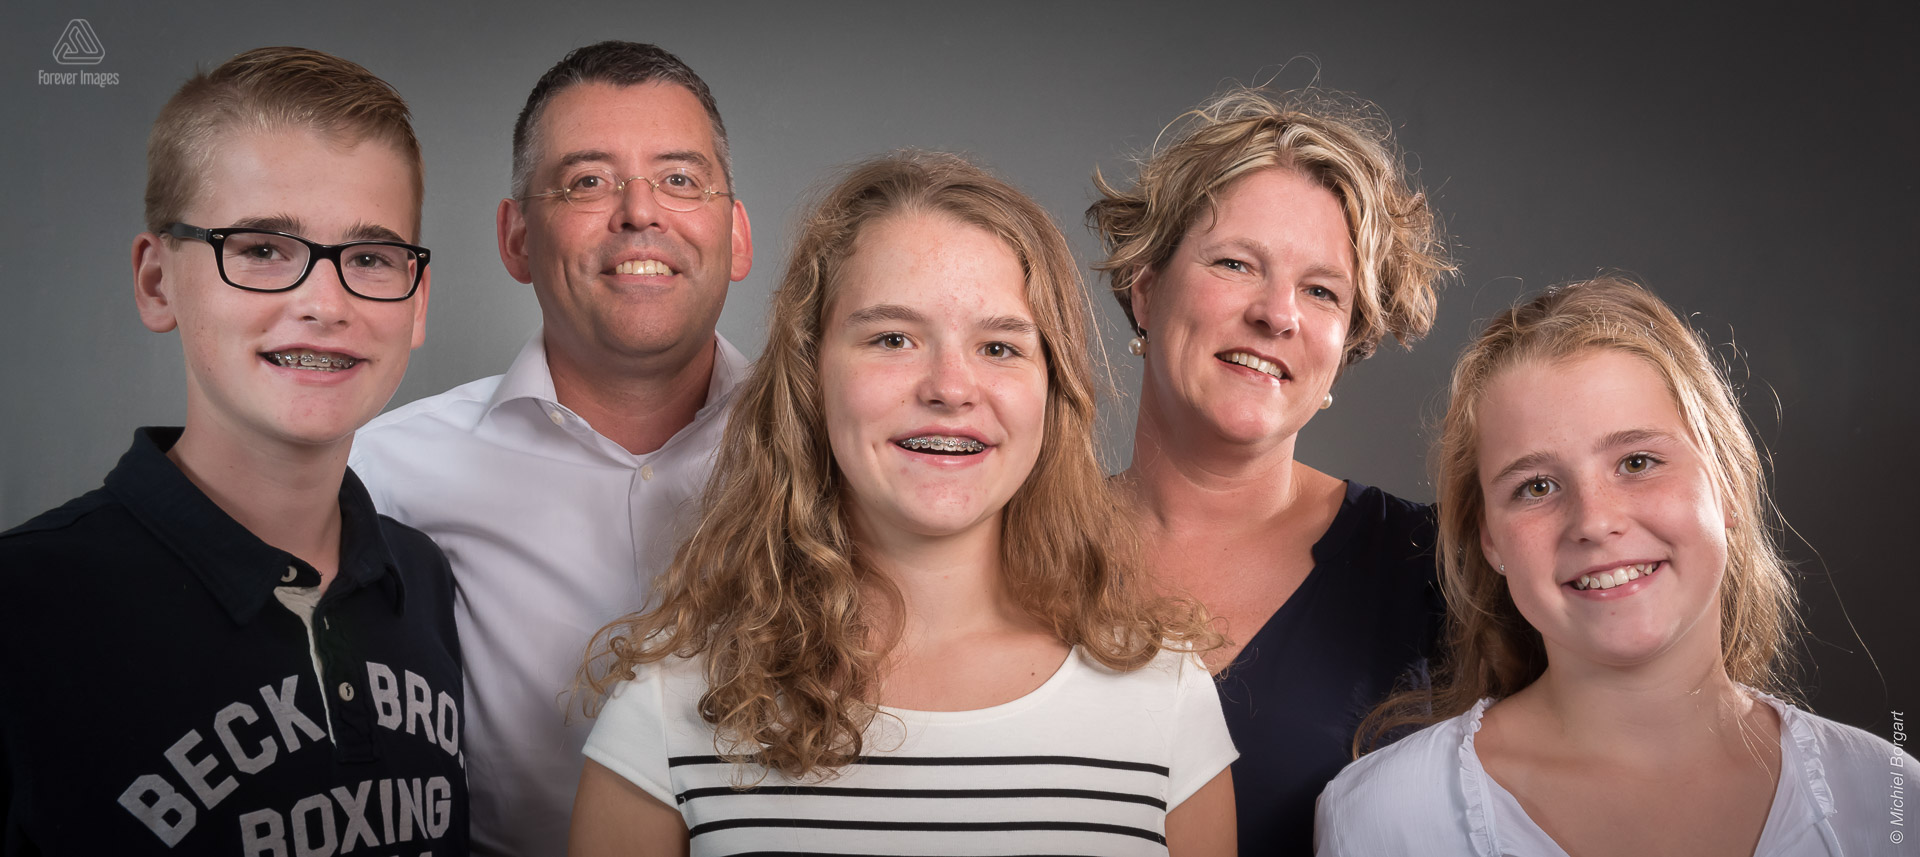 Family photo of father mother two daughters and son | Nienke Thomas Anna Stetha Jan | Portrait Photographer Michiel Borgart - Forever Images.